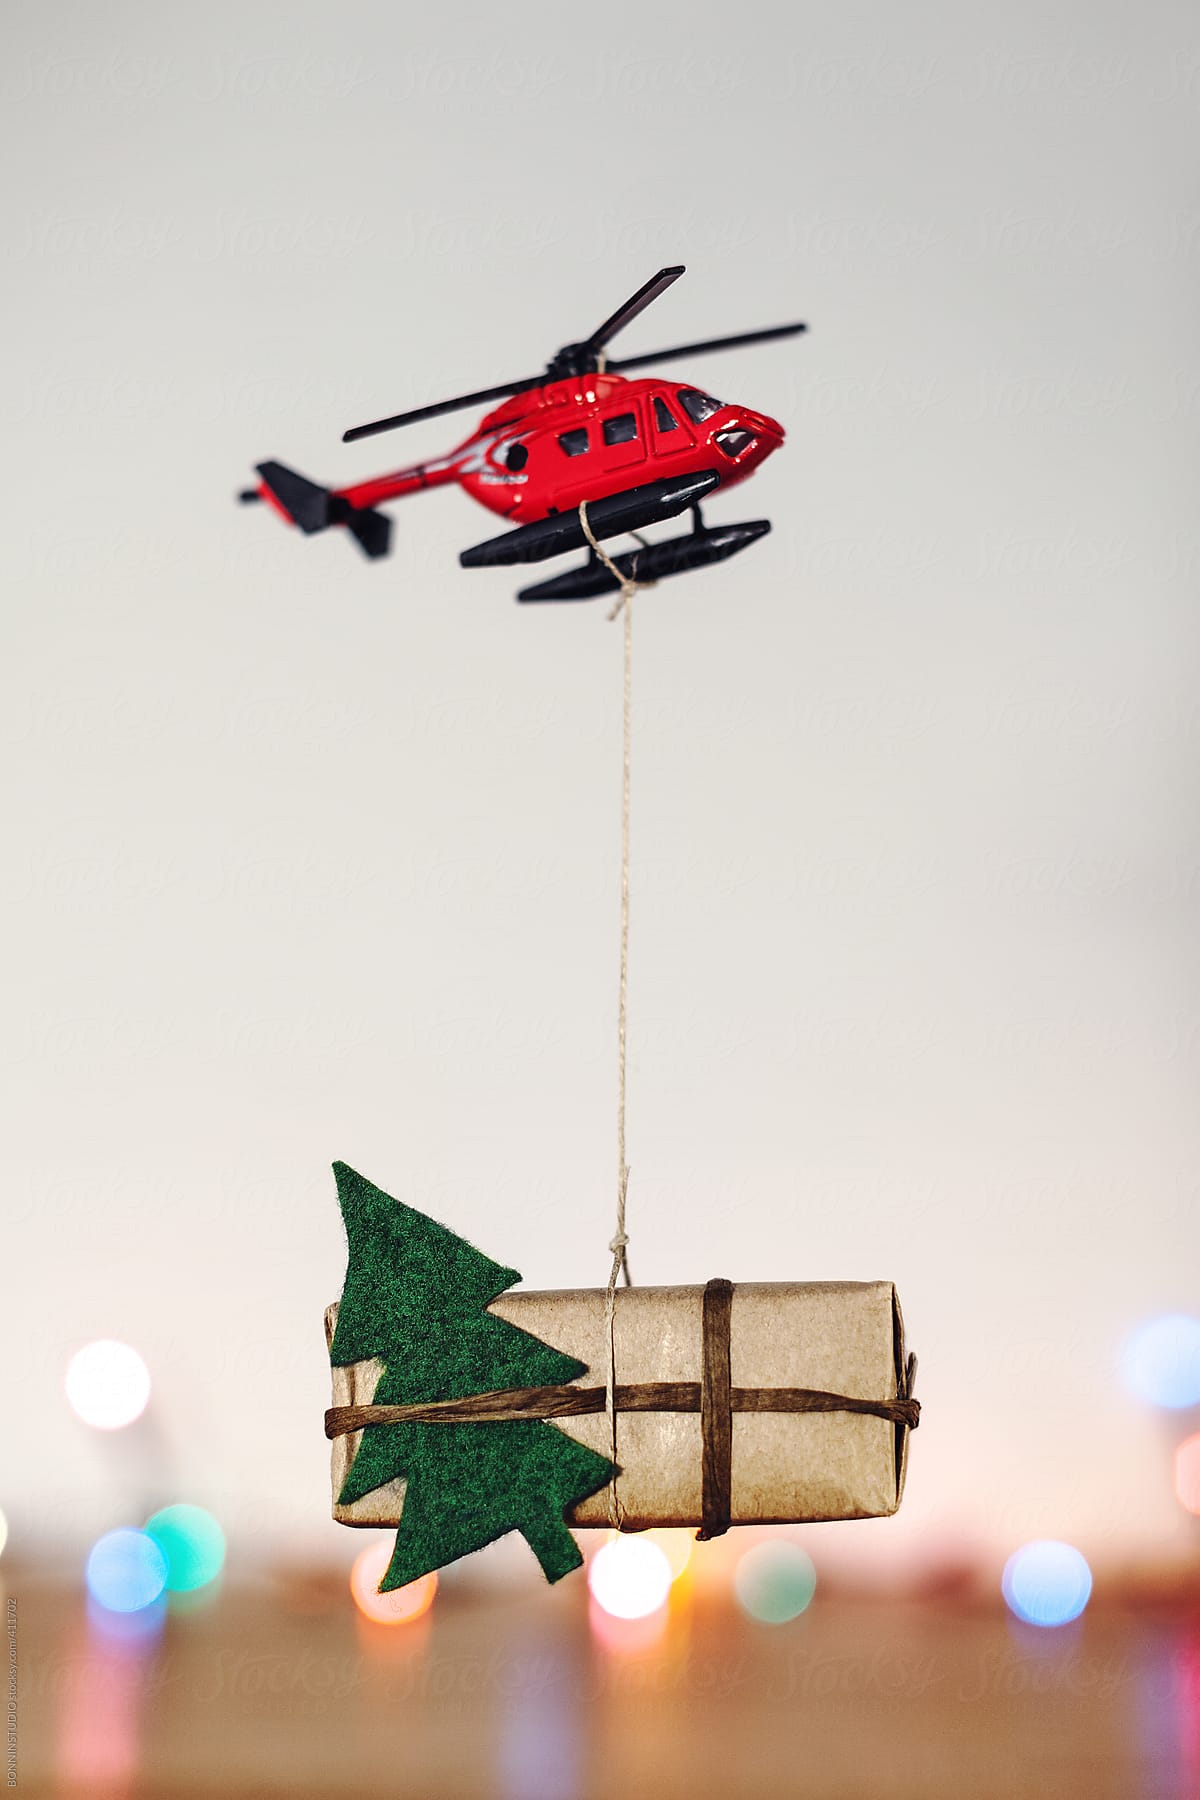 Christmas gift hanging on a red toy helicopter.